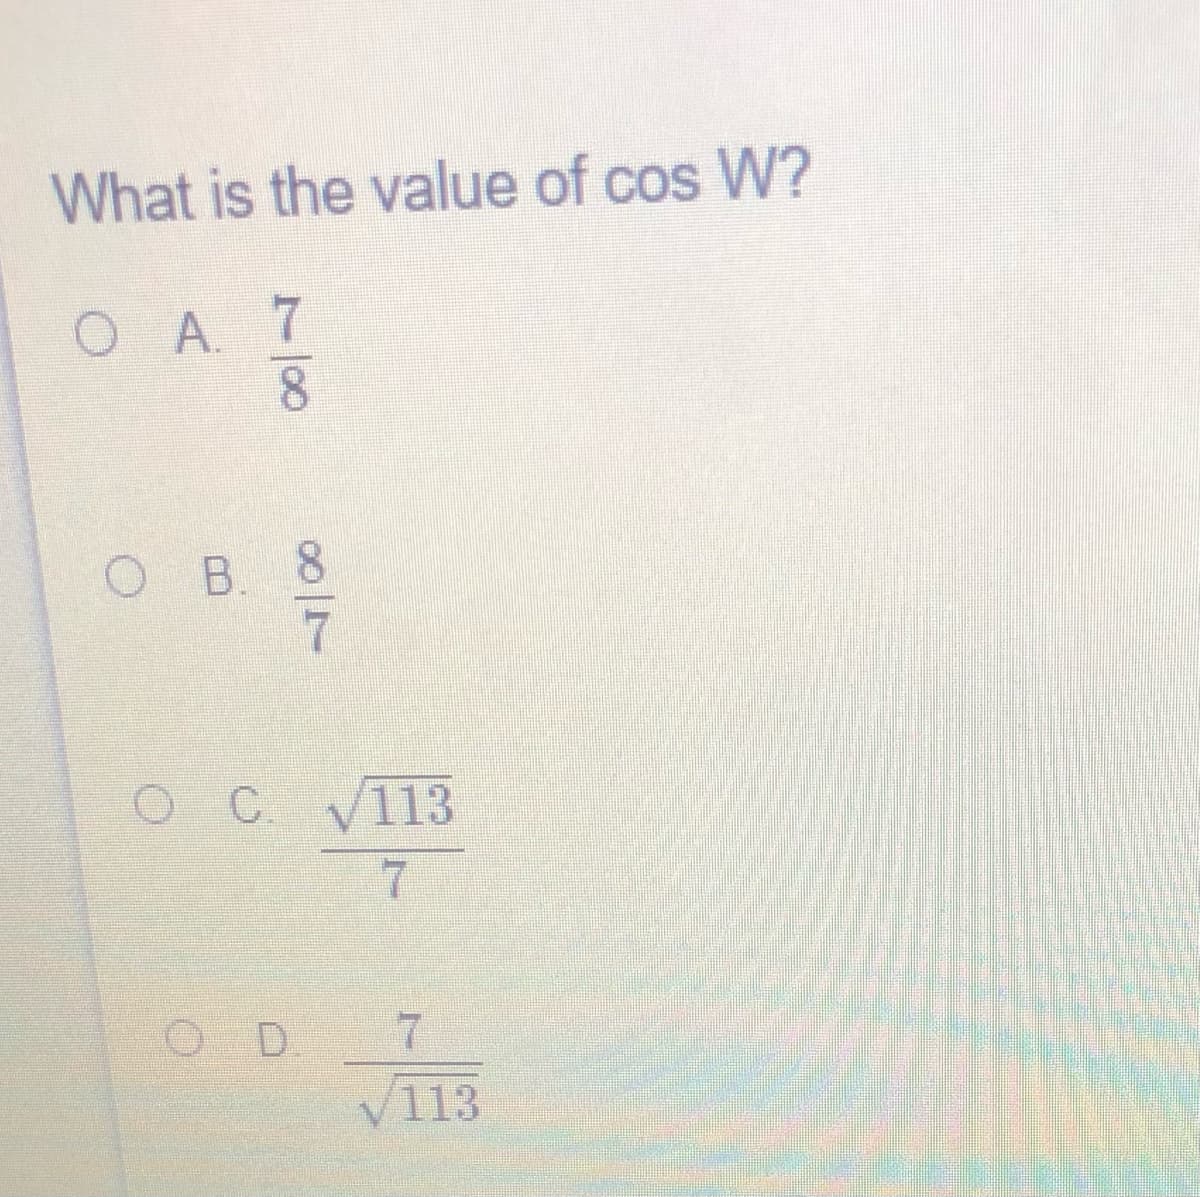 What is the value of cos W?
O A 7
OB.
V113
7.
D.
/113
7/8
00/7
